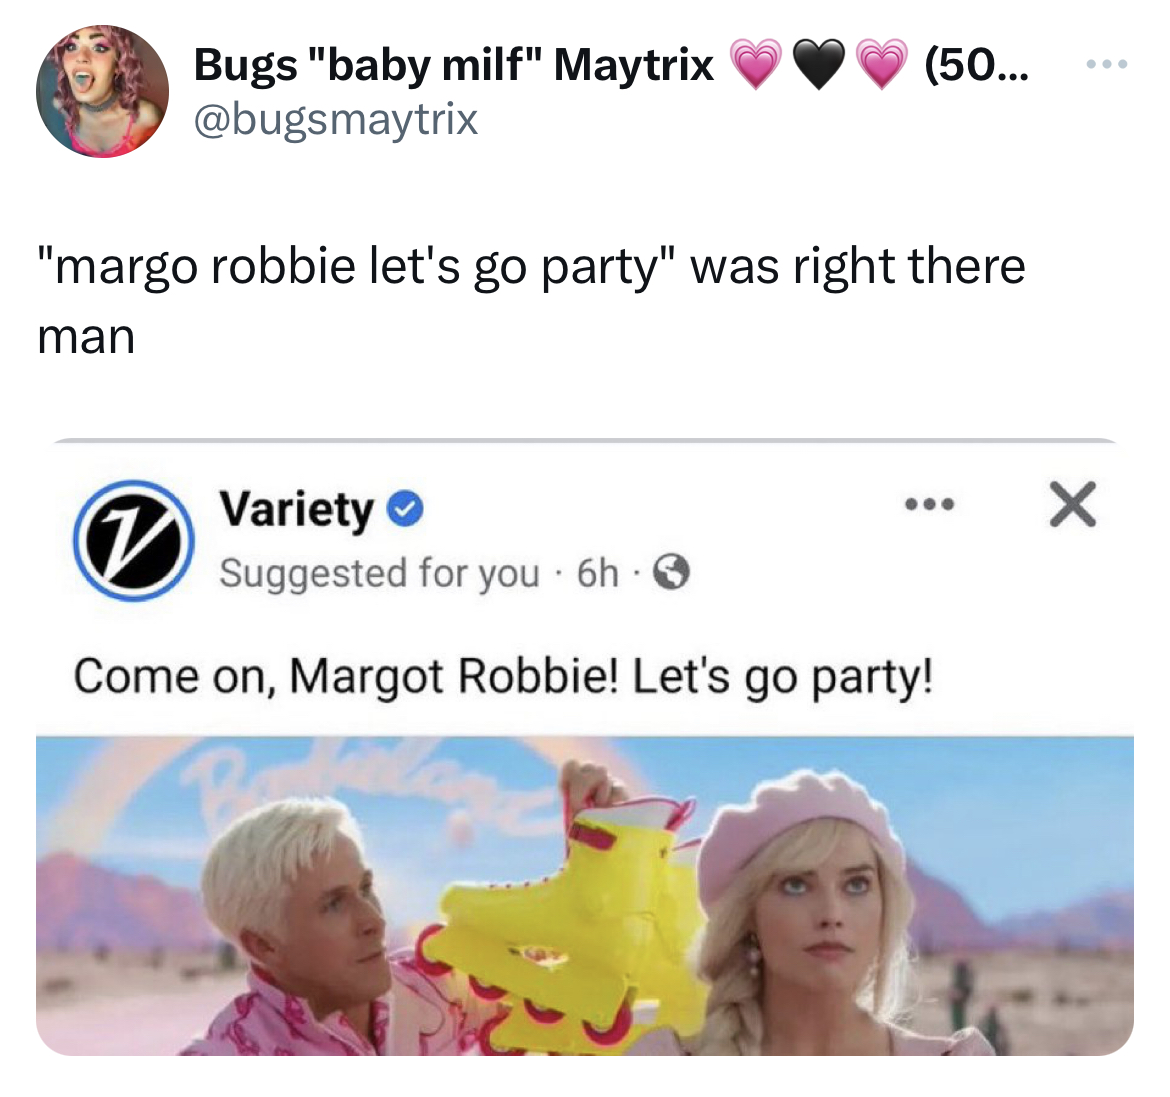 savage tweets human behavior - Bugs "baby milf" Maytrix 50... "margo robbie let's go party" was right there man Variety D Suggested for you. 6h Come on, Margot Robbie! Let's go party! X